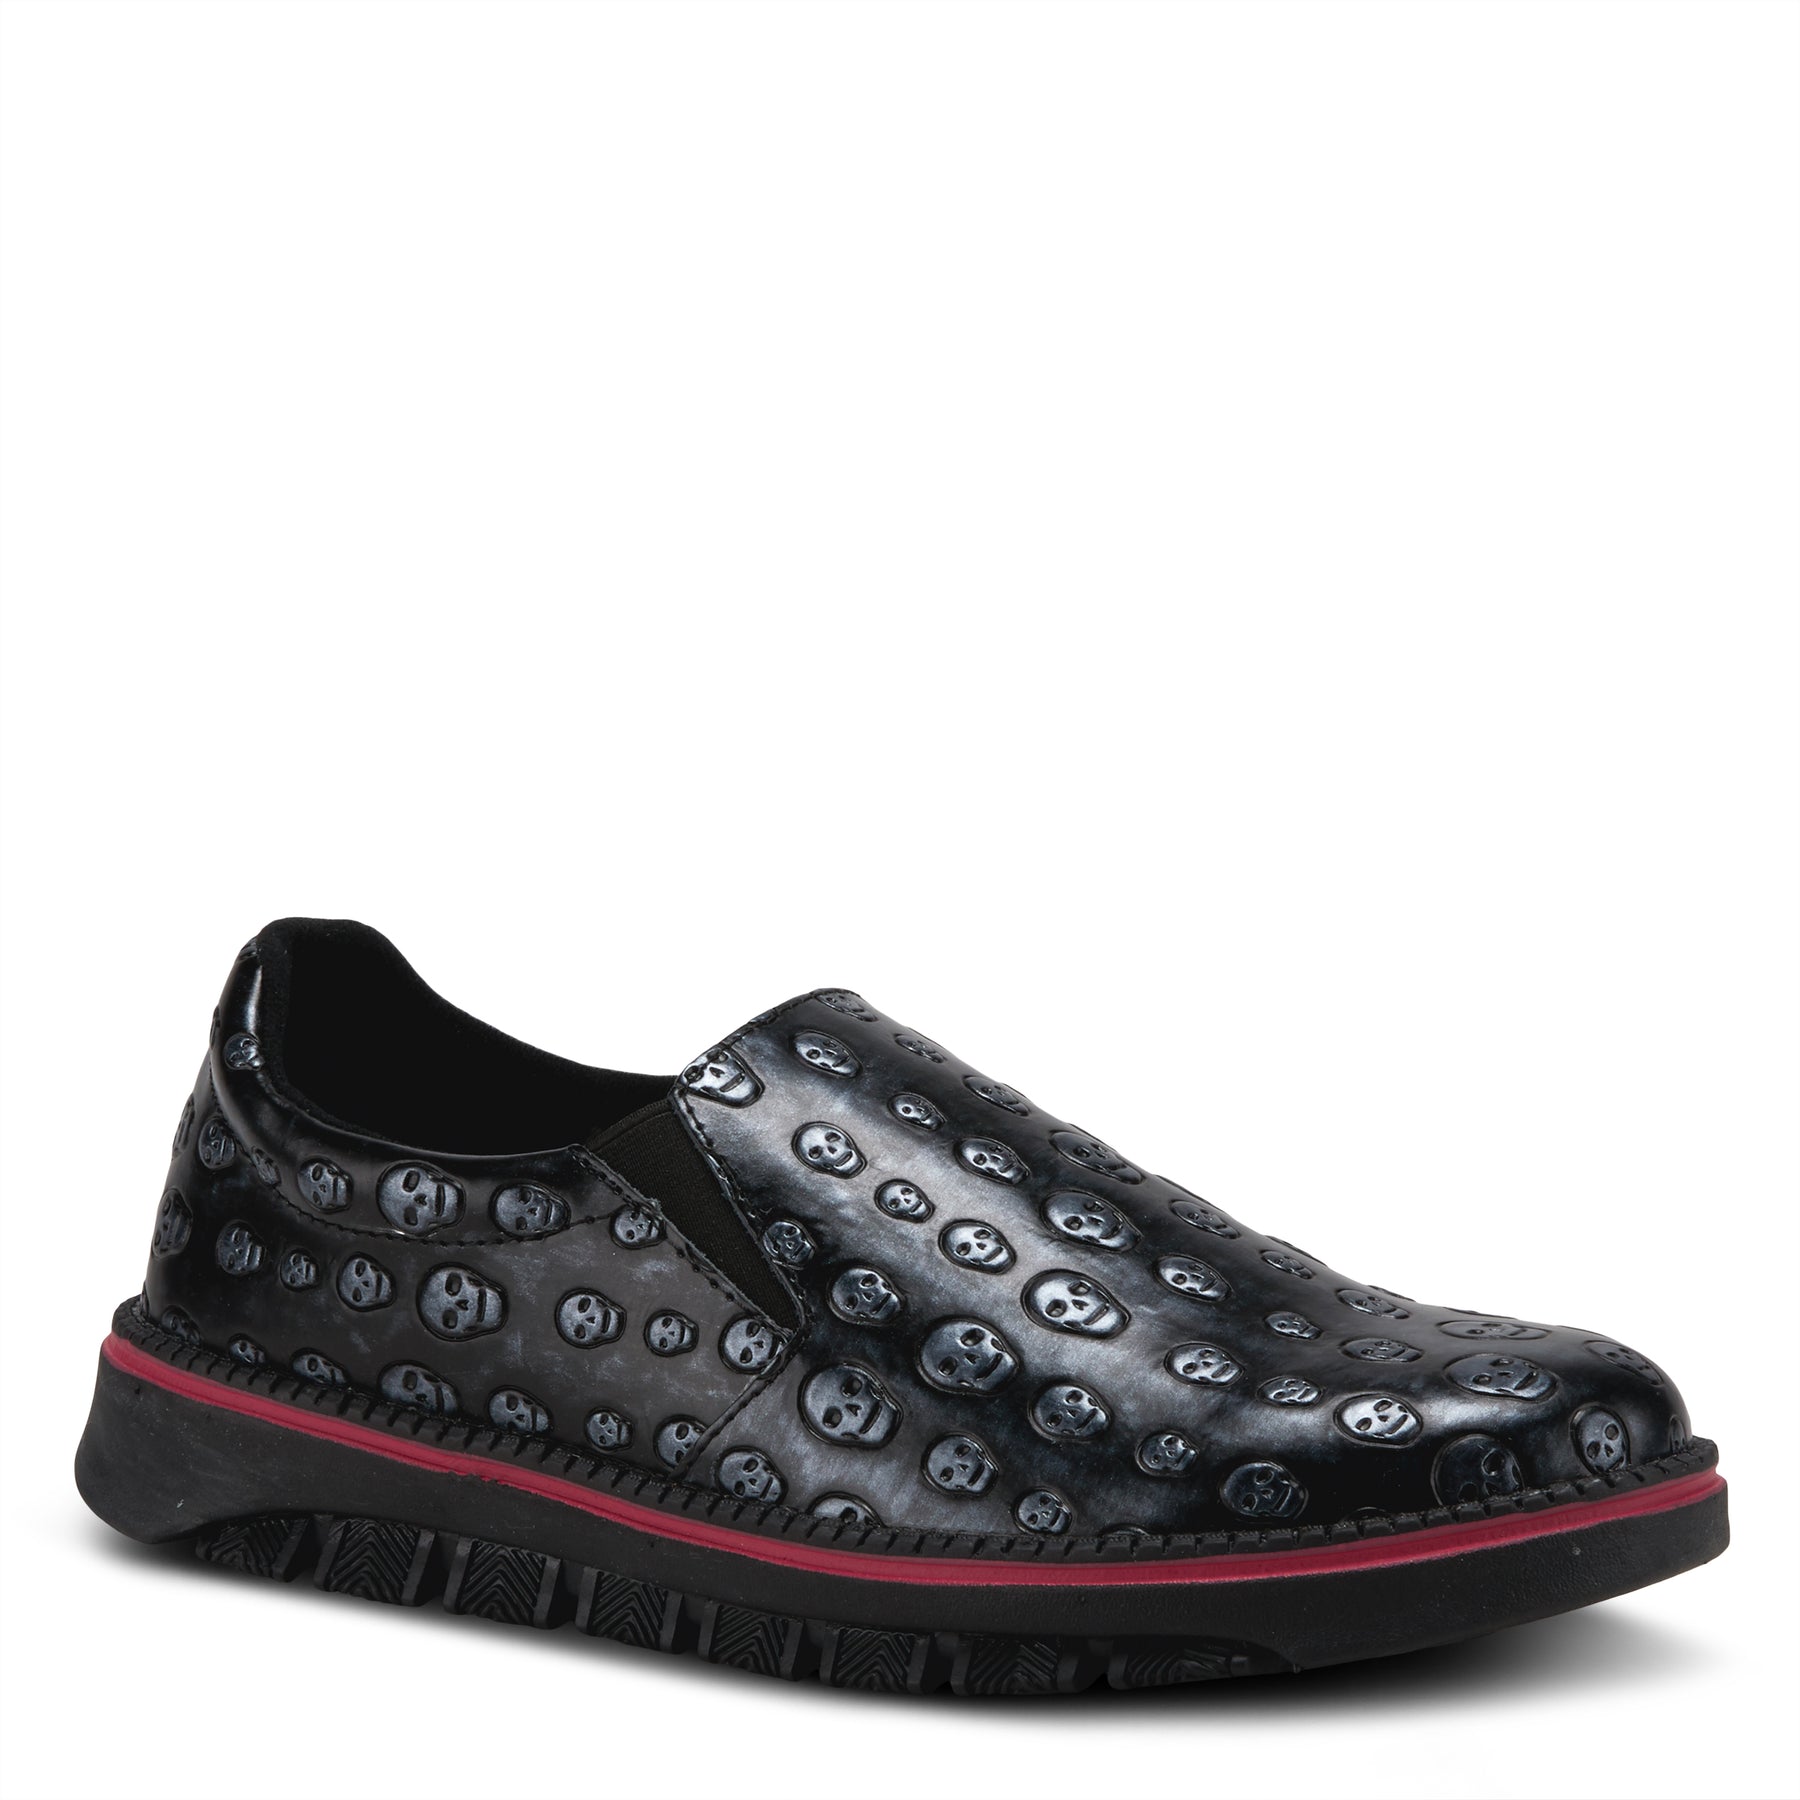 POWER-SKULL SLIP-ON SHOE by SPRING STEP PROFESSIONAL – Spring Step Shoes